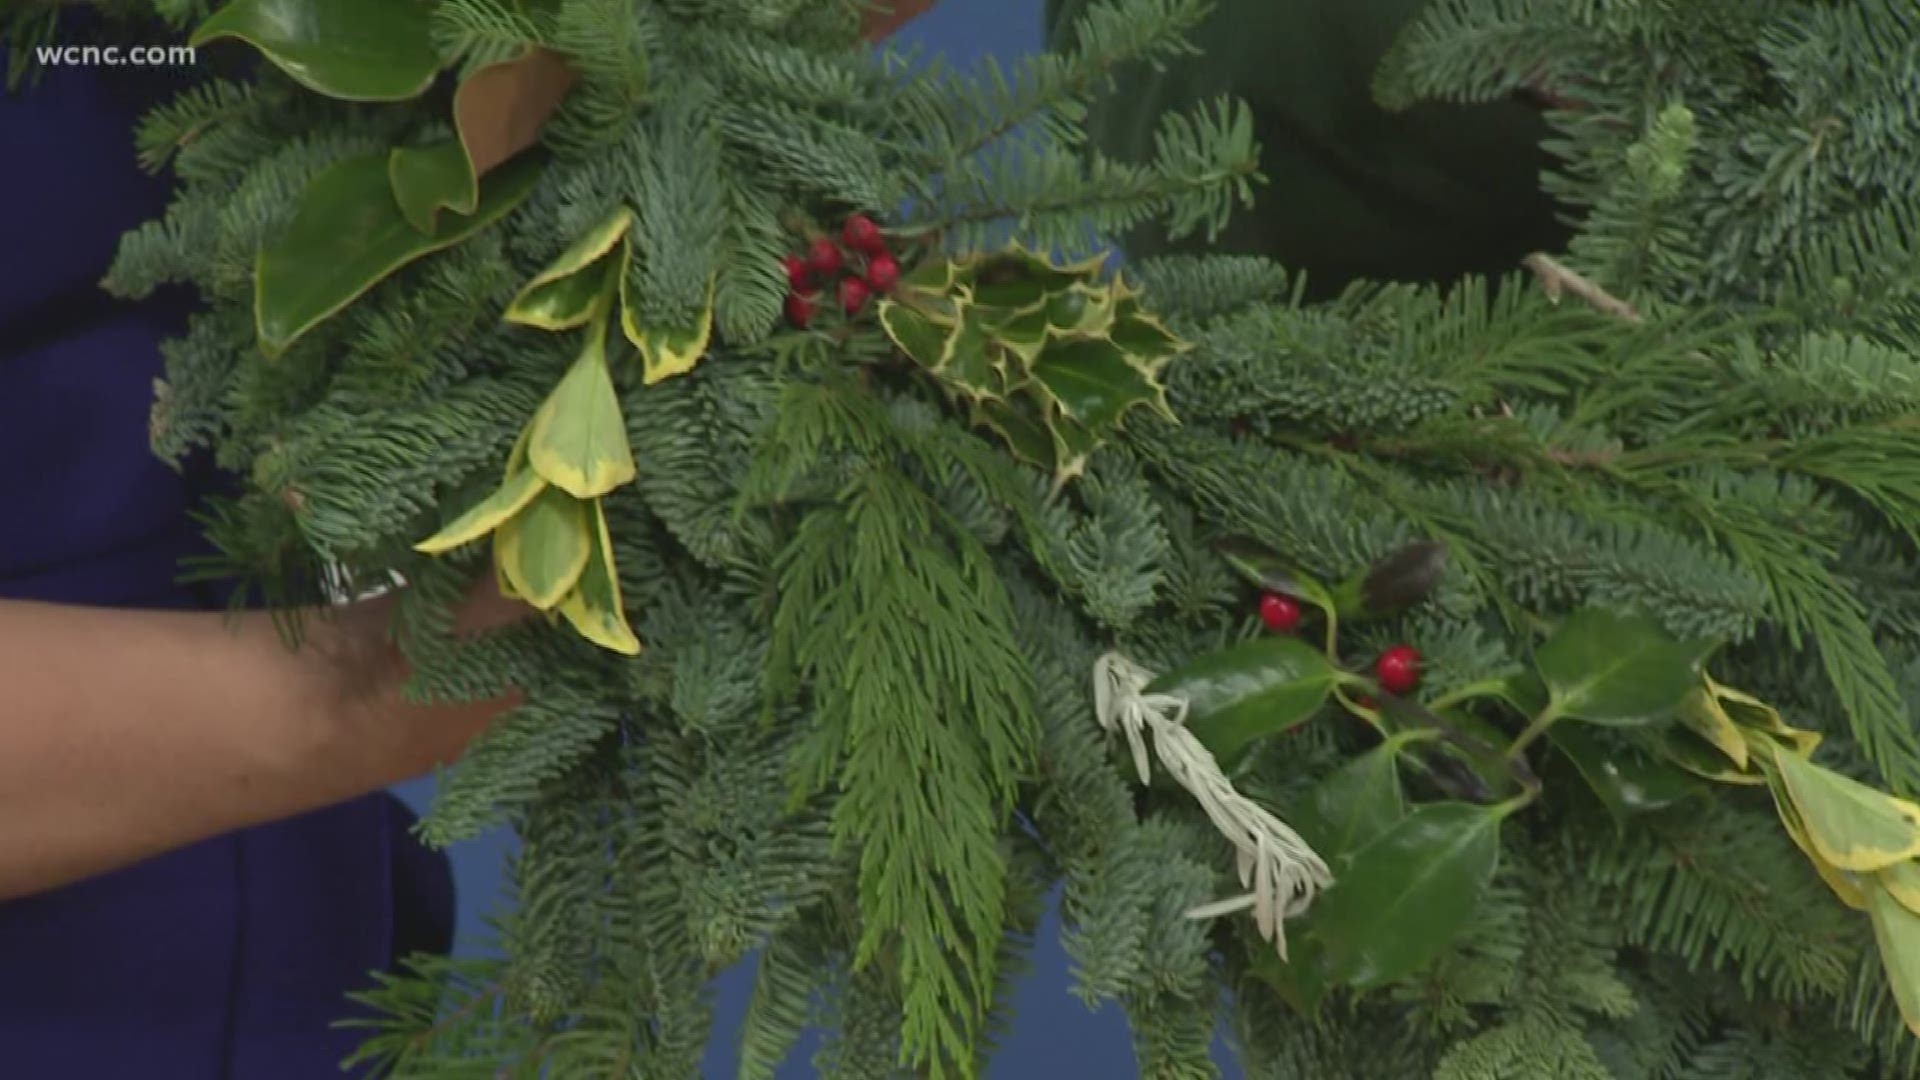 Tracy Black with Pike Nursery shares fun and easy ways to decorate a seasonal wreath.